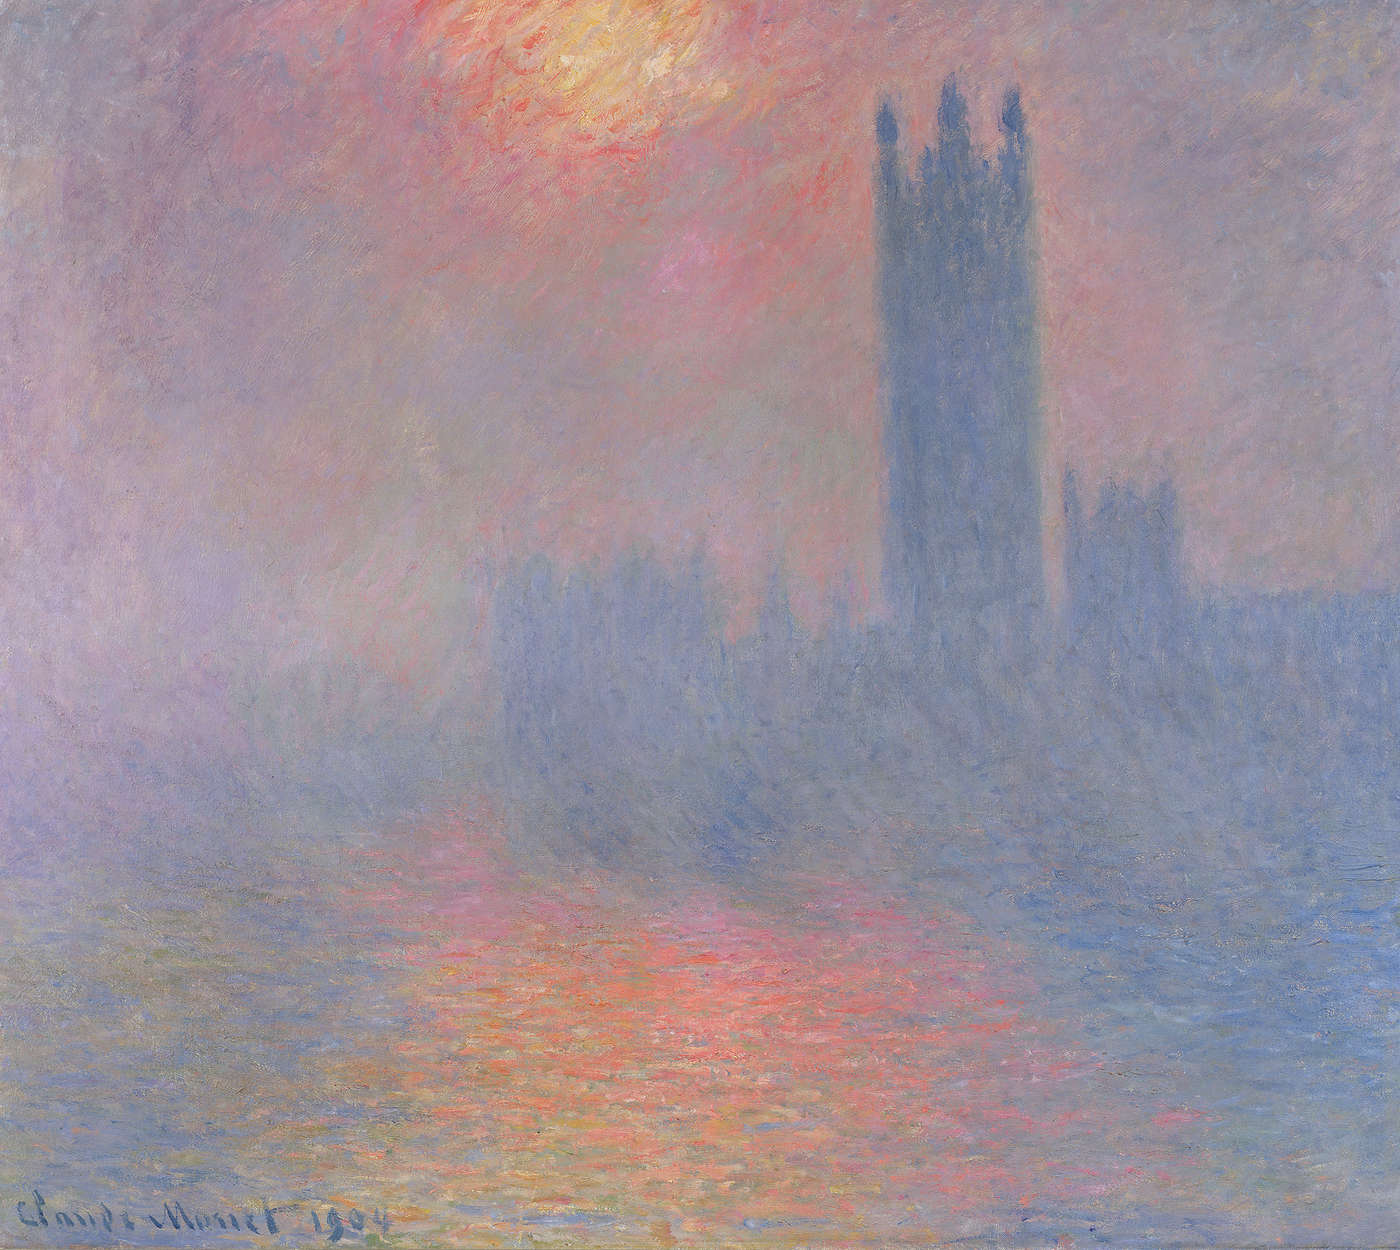             Photo wallpaper "The ParliamentLondonwith the sun breaking through the fog" by Claude Monet
        